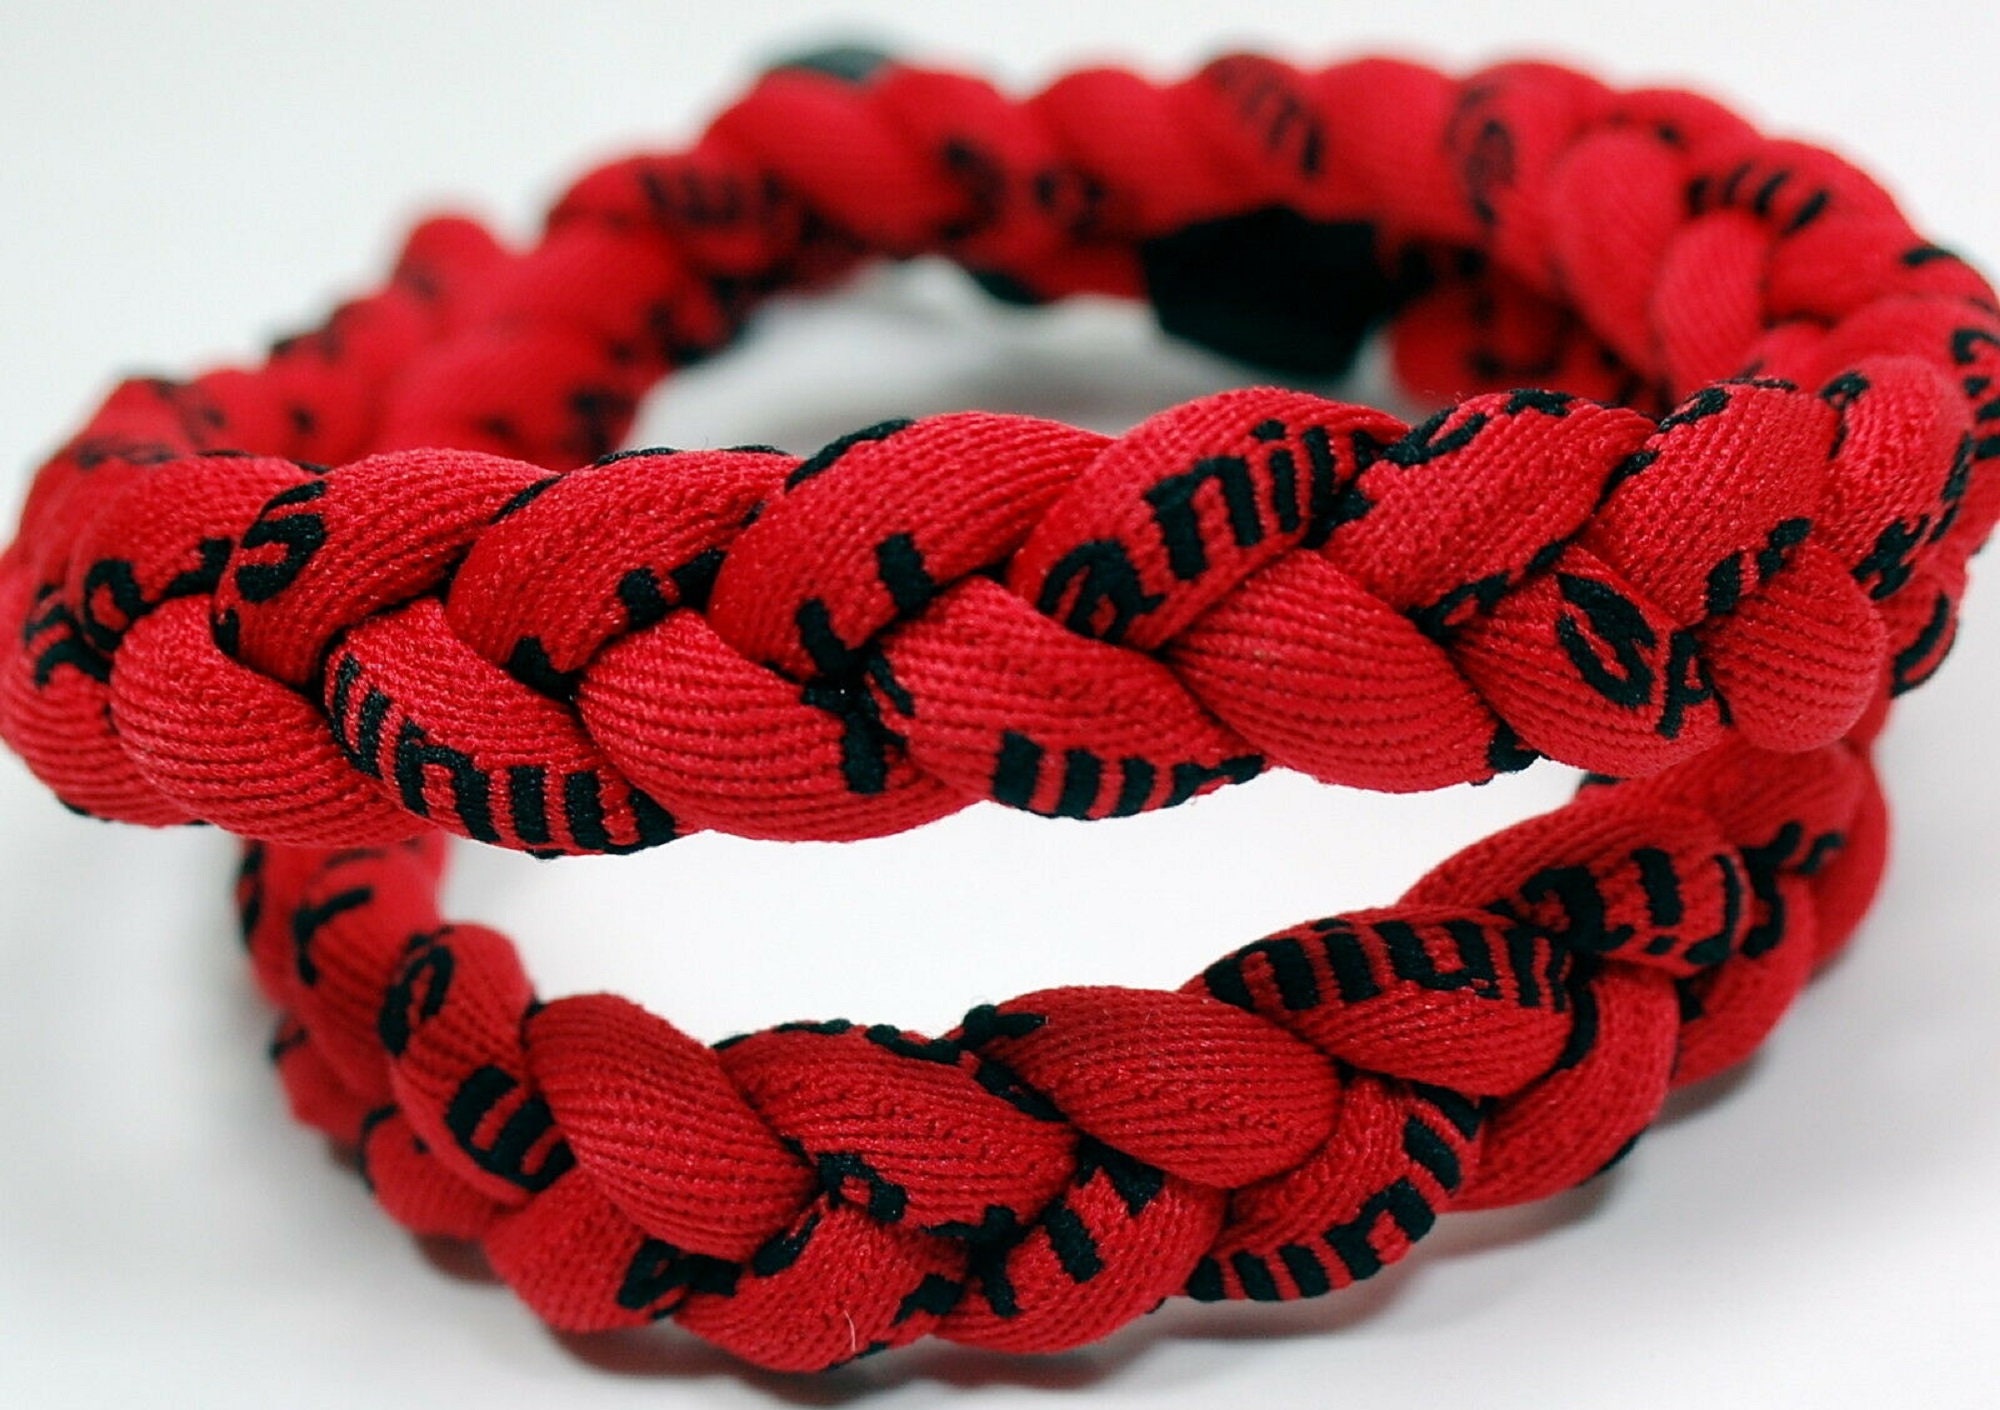 Buy All Red 20 Inch 3 Rope Braided Tornado Baseball Necklace Team Online in  India 